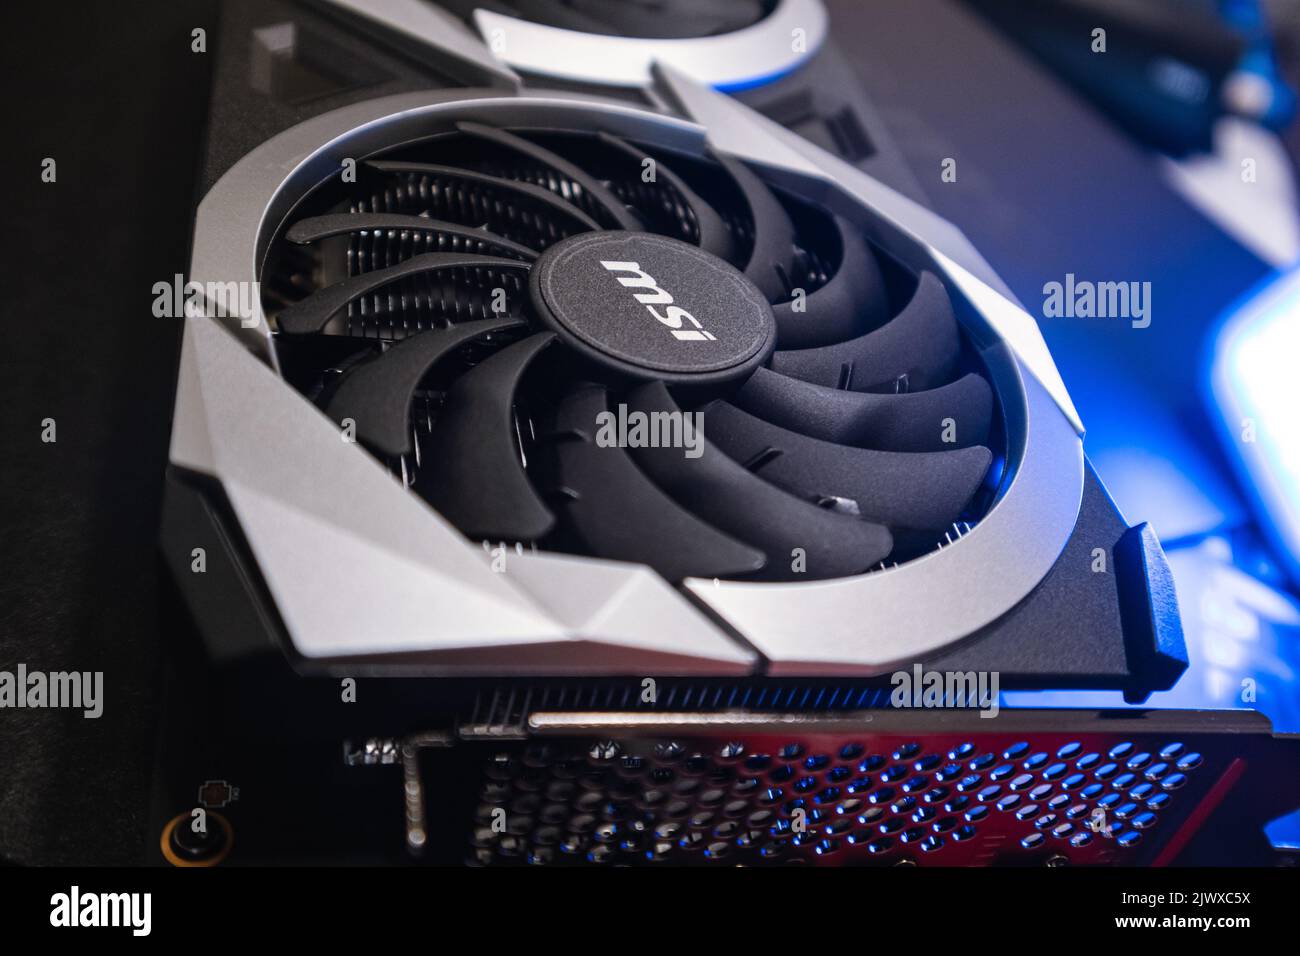 Kyiv, Ukraine - August 19, 2022: Cooler in blue light, MSI graphics card with AMD Radeon chipset, close-up with selective focus, dark design Stock Photo